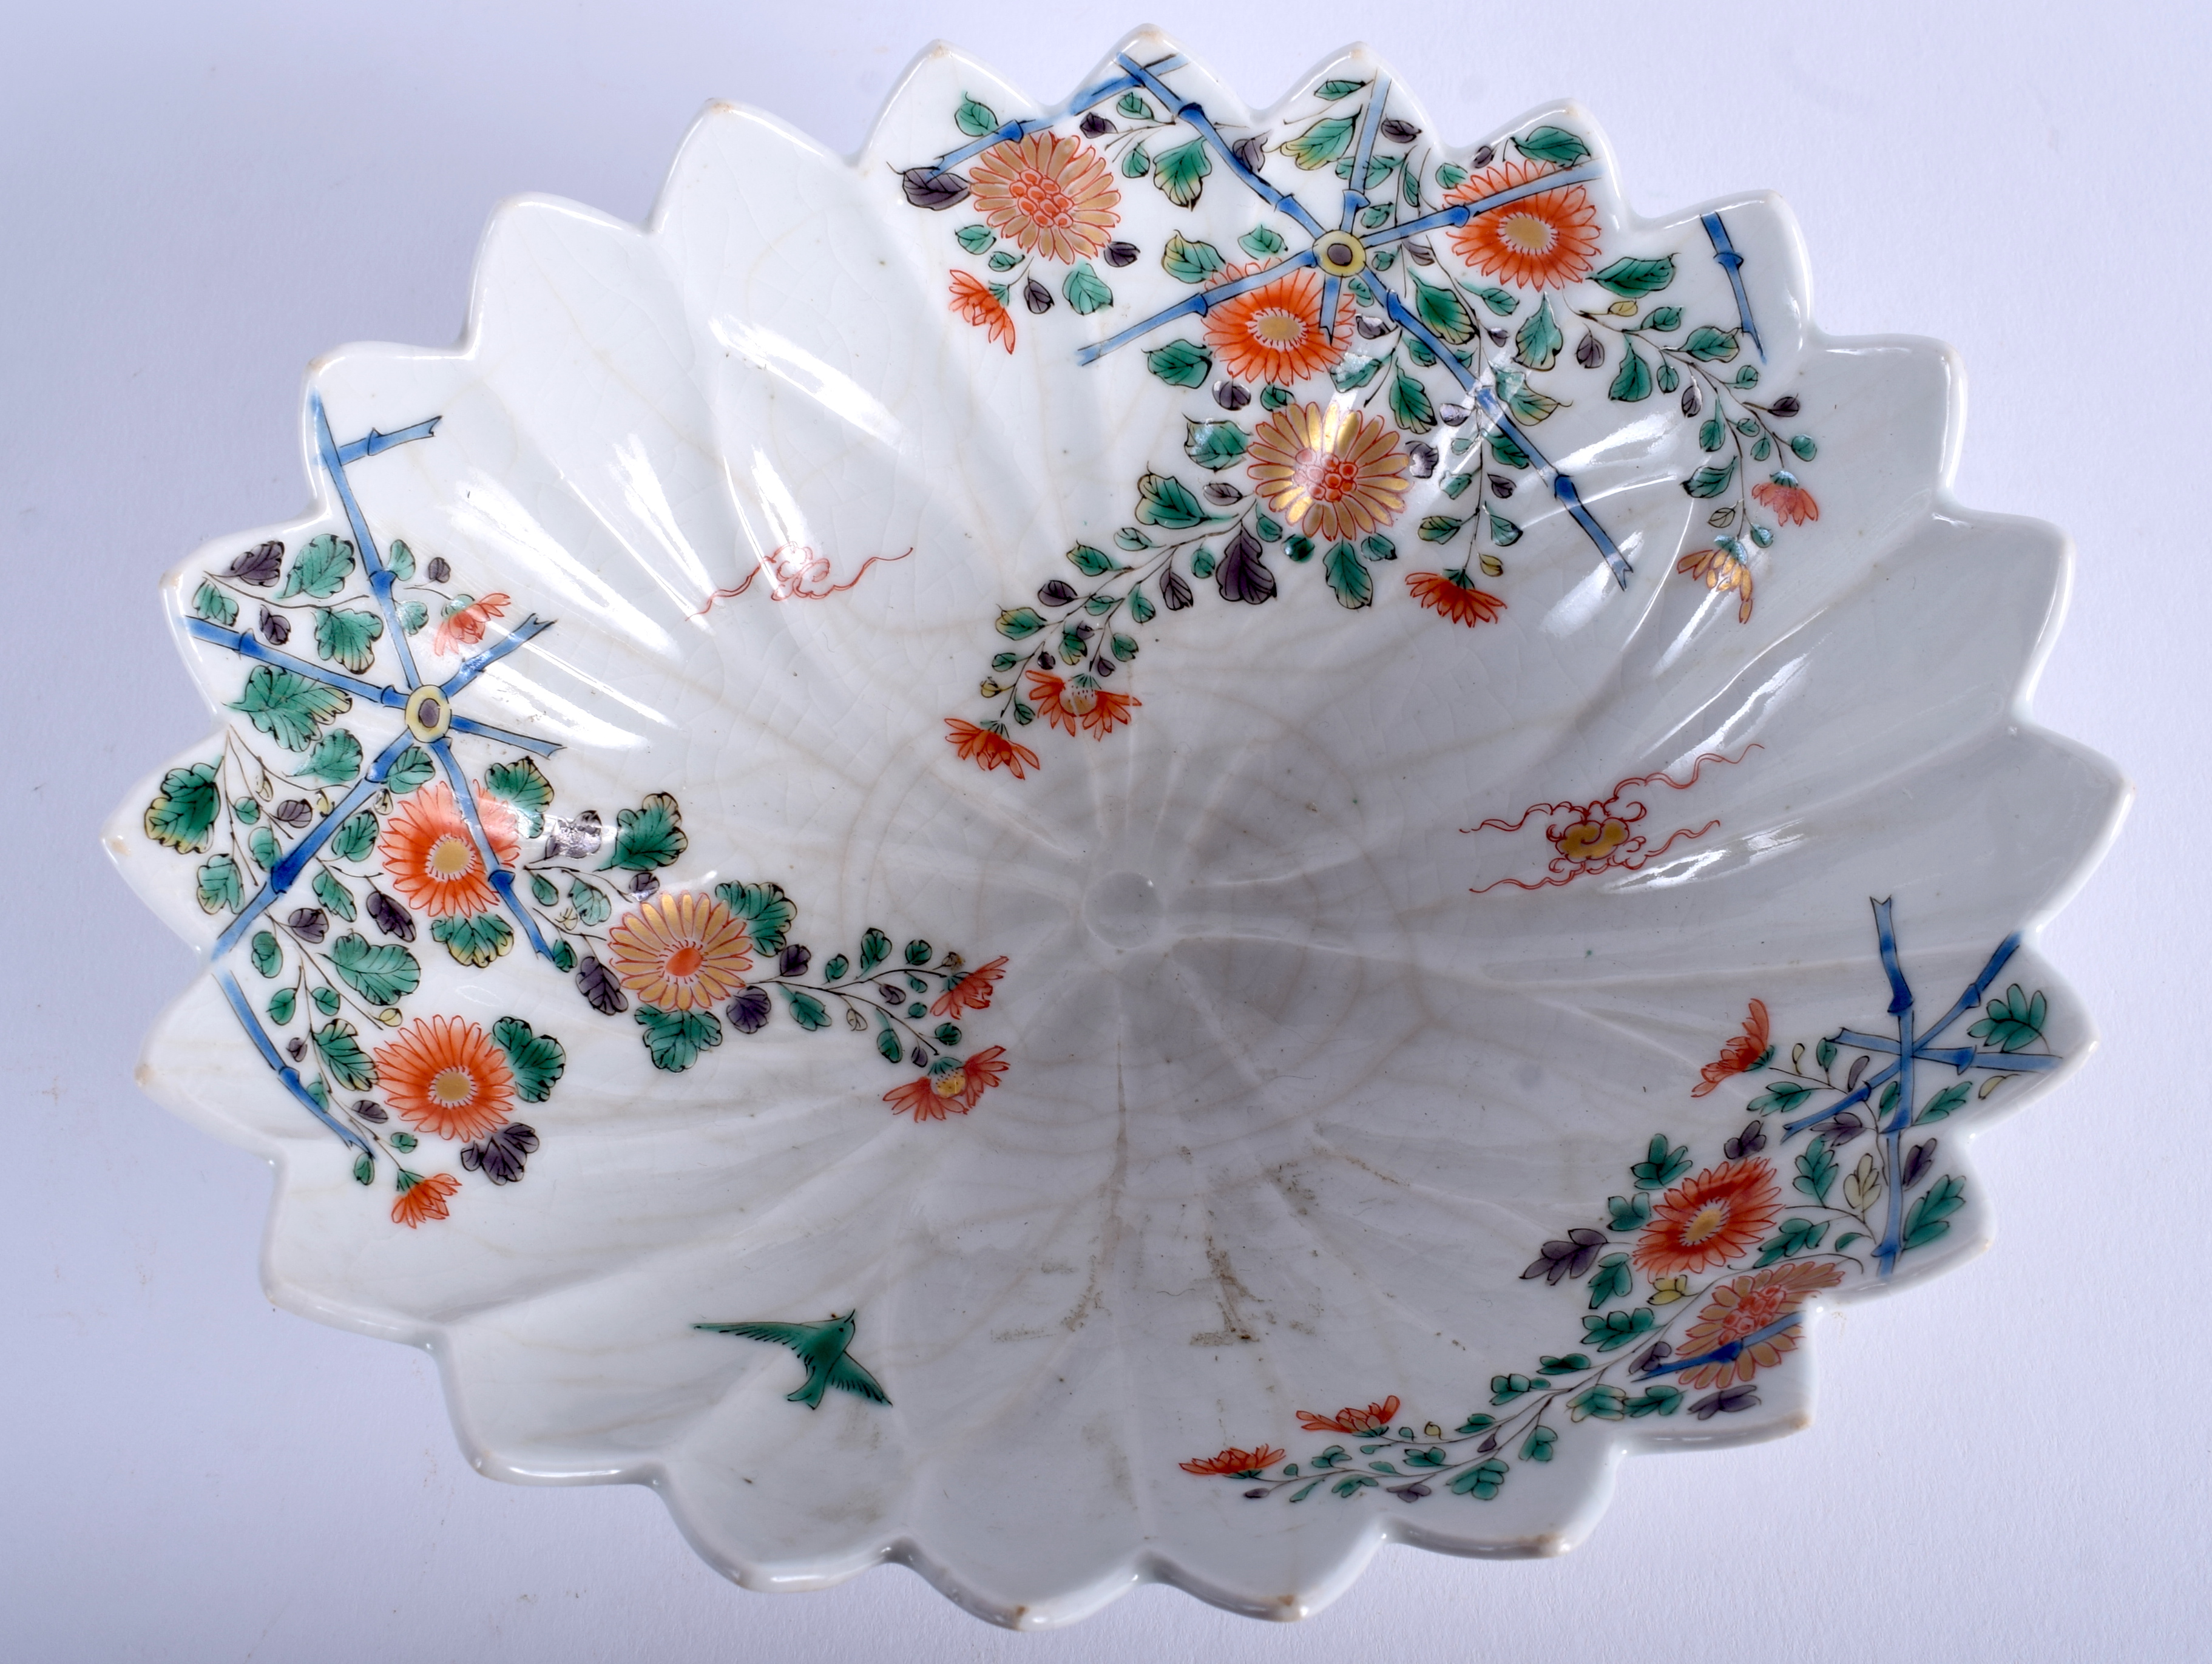 AN 18TH CENTURY JAPANESE EDO PERIOD KAKIEMON BOWL painted with foliage and birds. 16 cm x 12 cm. - Image 3 of 4